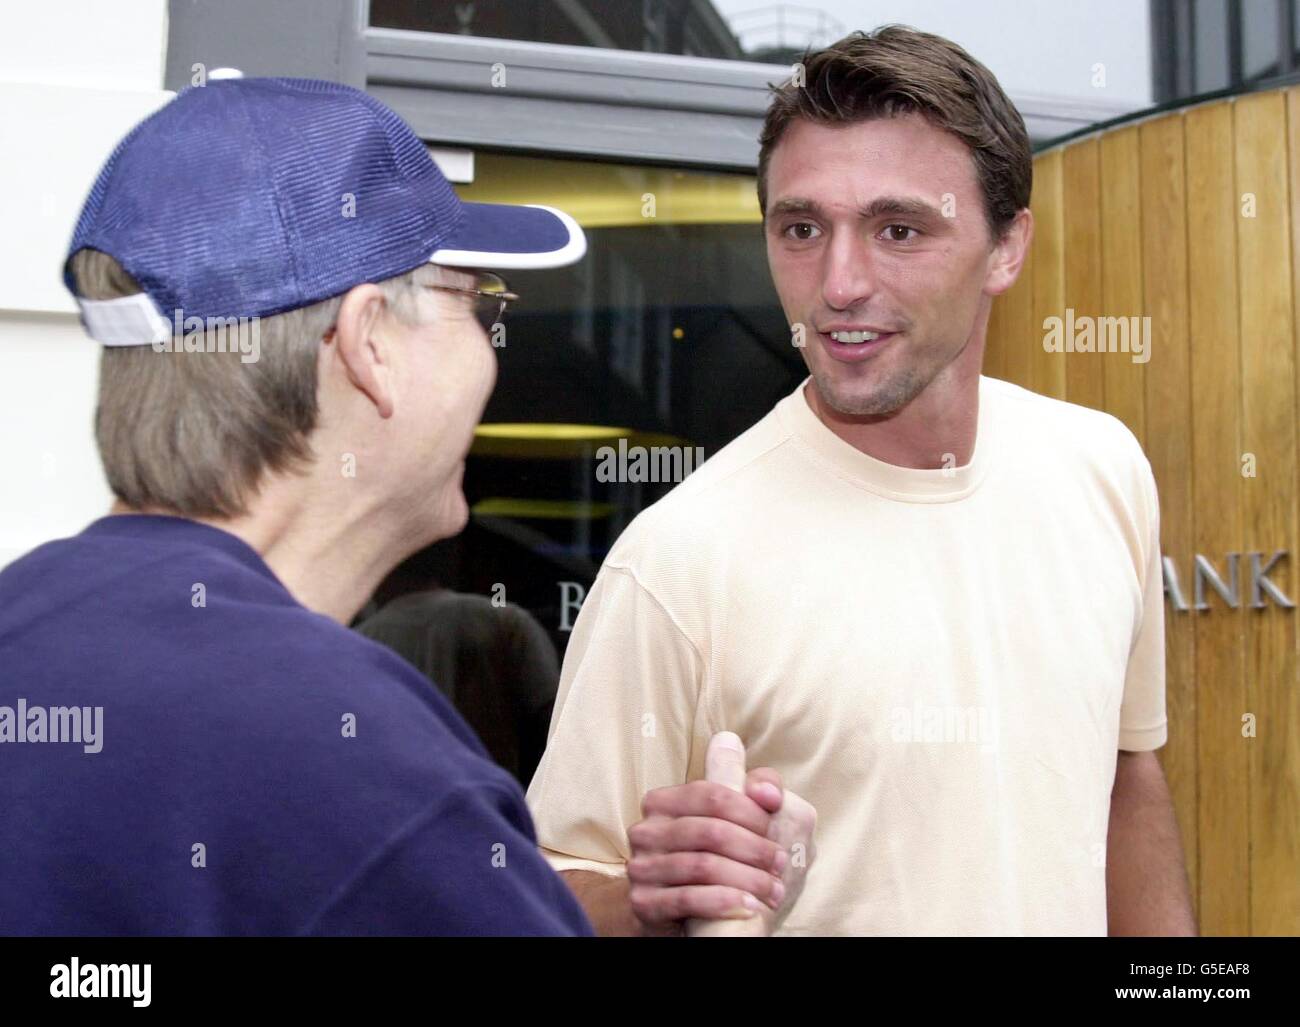 Wild card Wimbledon champion Goran Ivanisevic is greeted by a fan as he leaves a press conference in London. The 29-year-old Croat, won a dramatic five-set battle with Australian Pat Rafter in his fourth Wimbledon final. Stock Photo